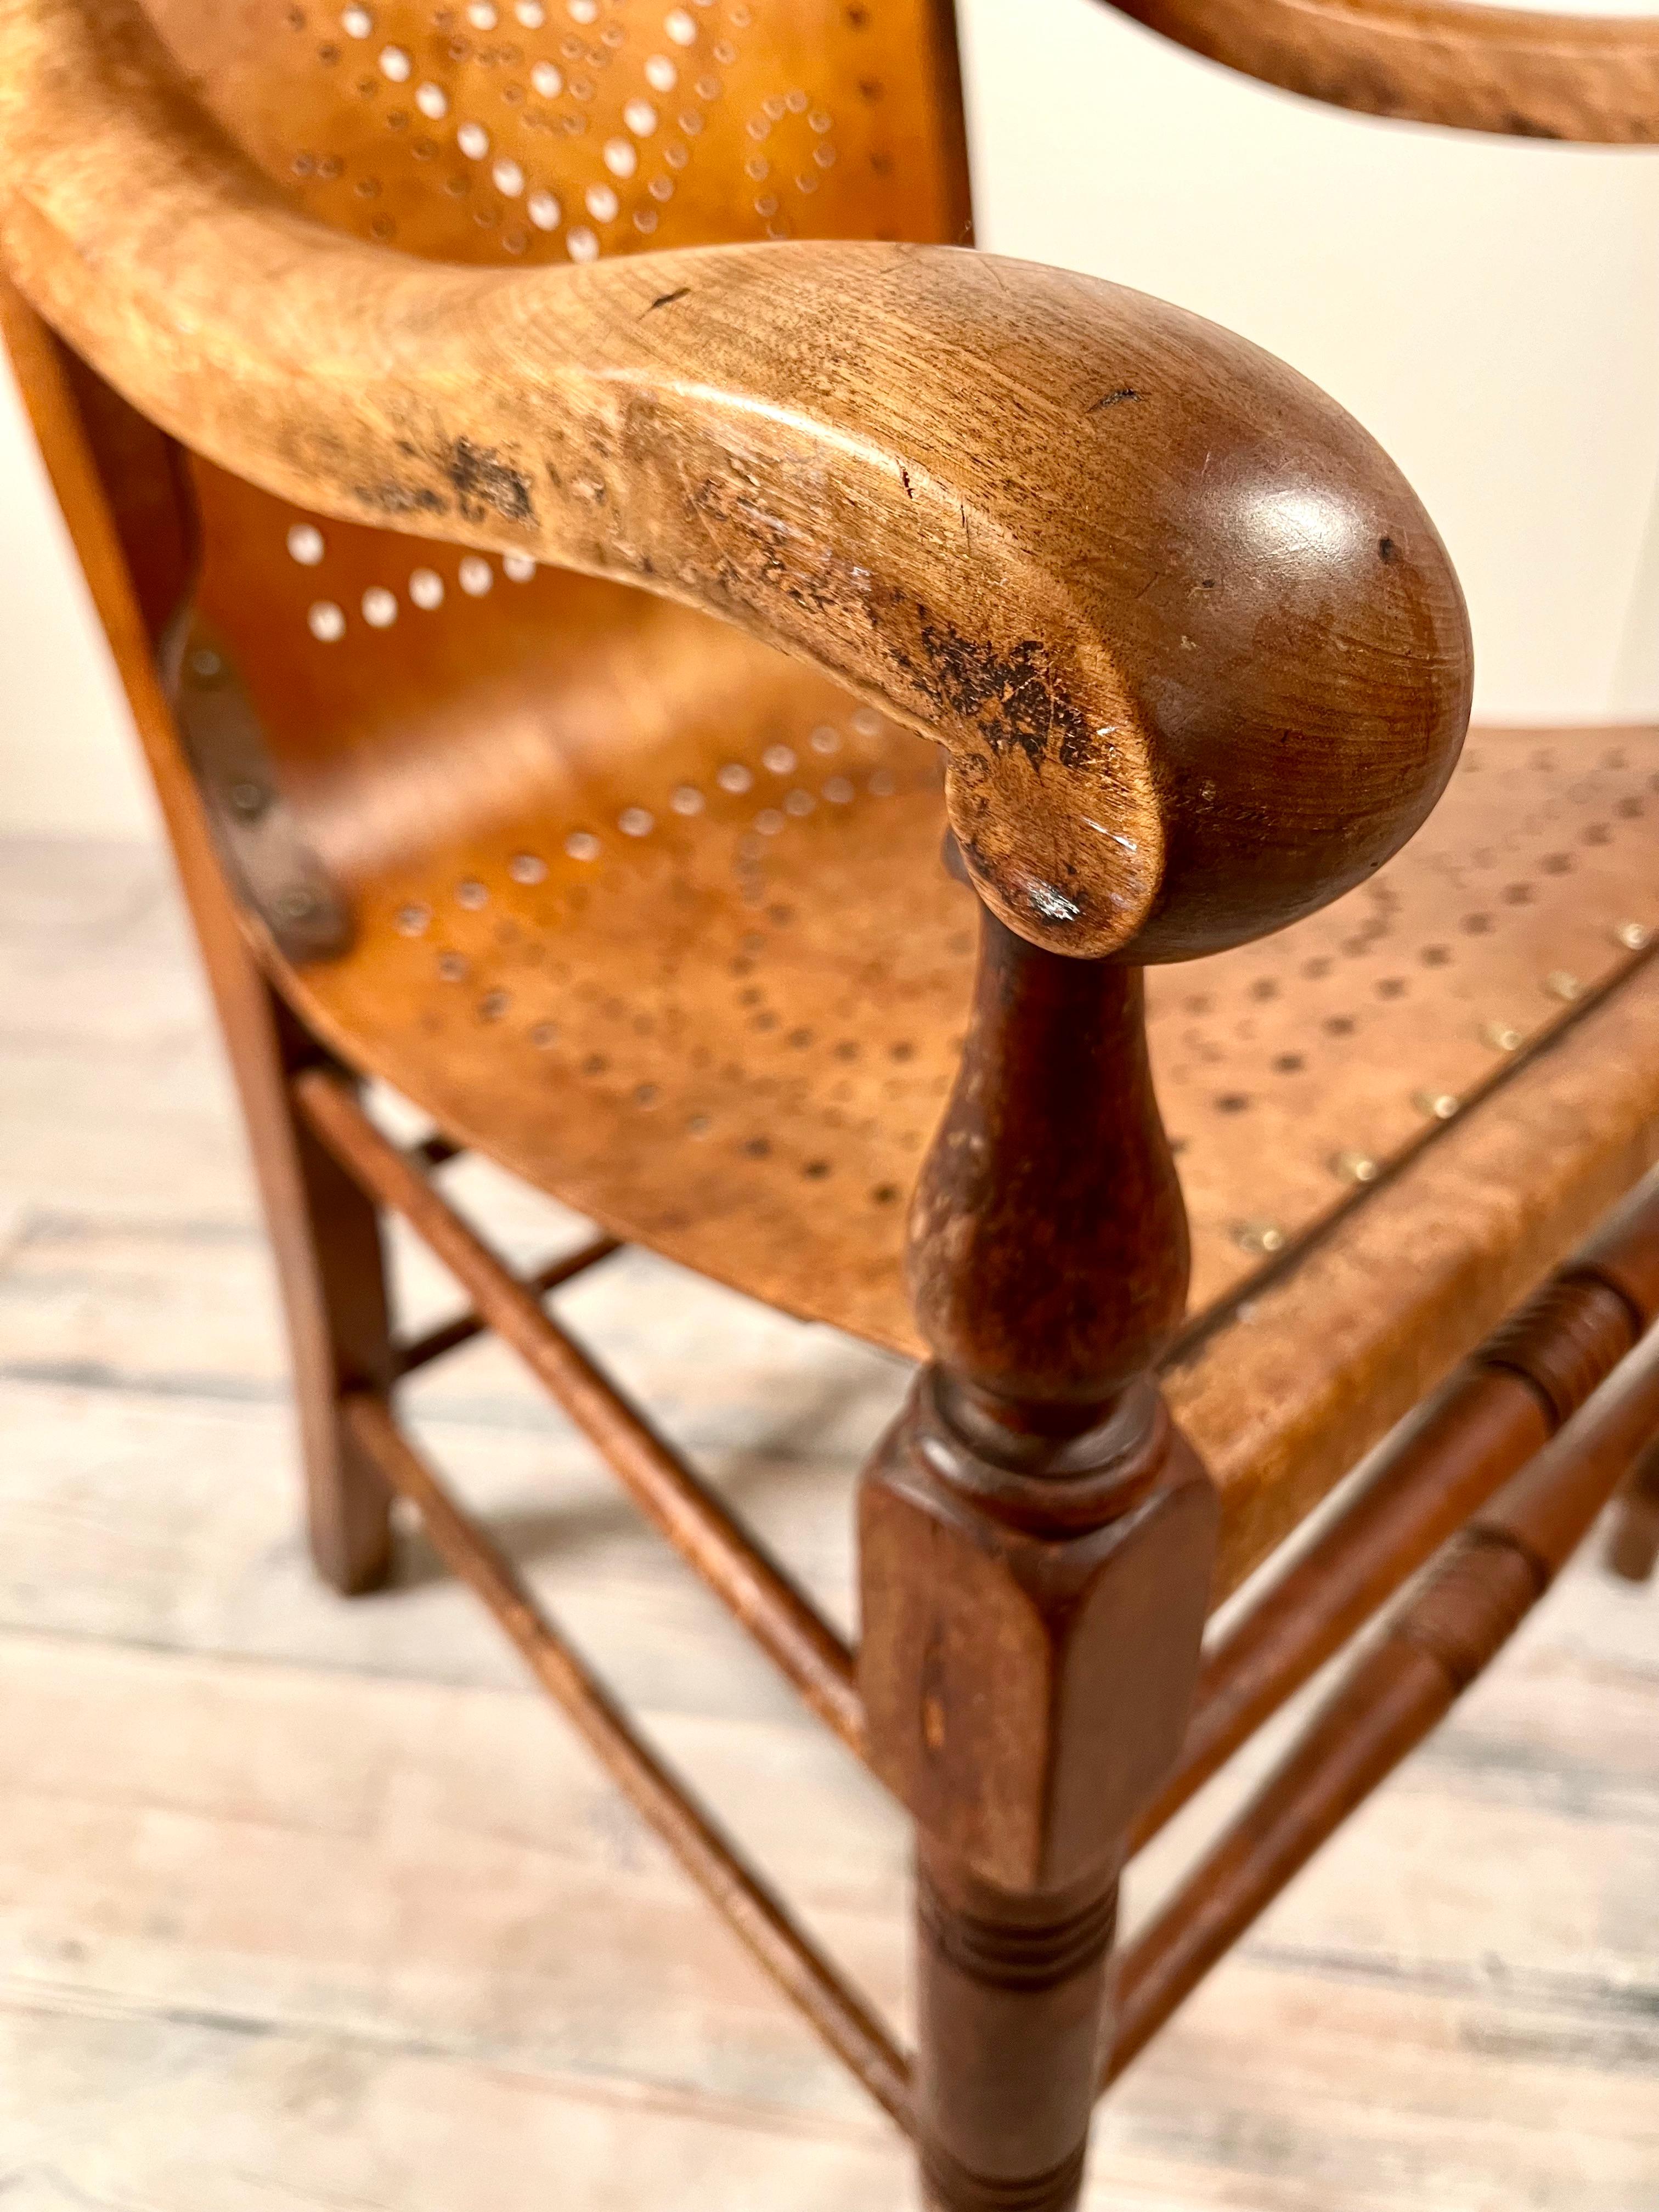 American Craftsman Gardner & Co. Pierced Bent Ply and Oak Frame Arm Chair c.1872 For Sale